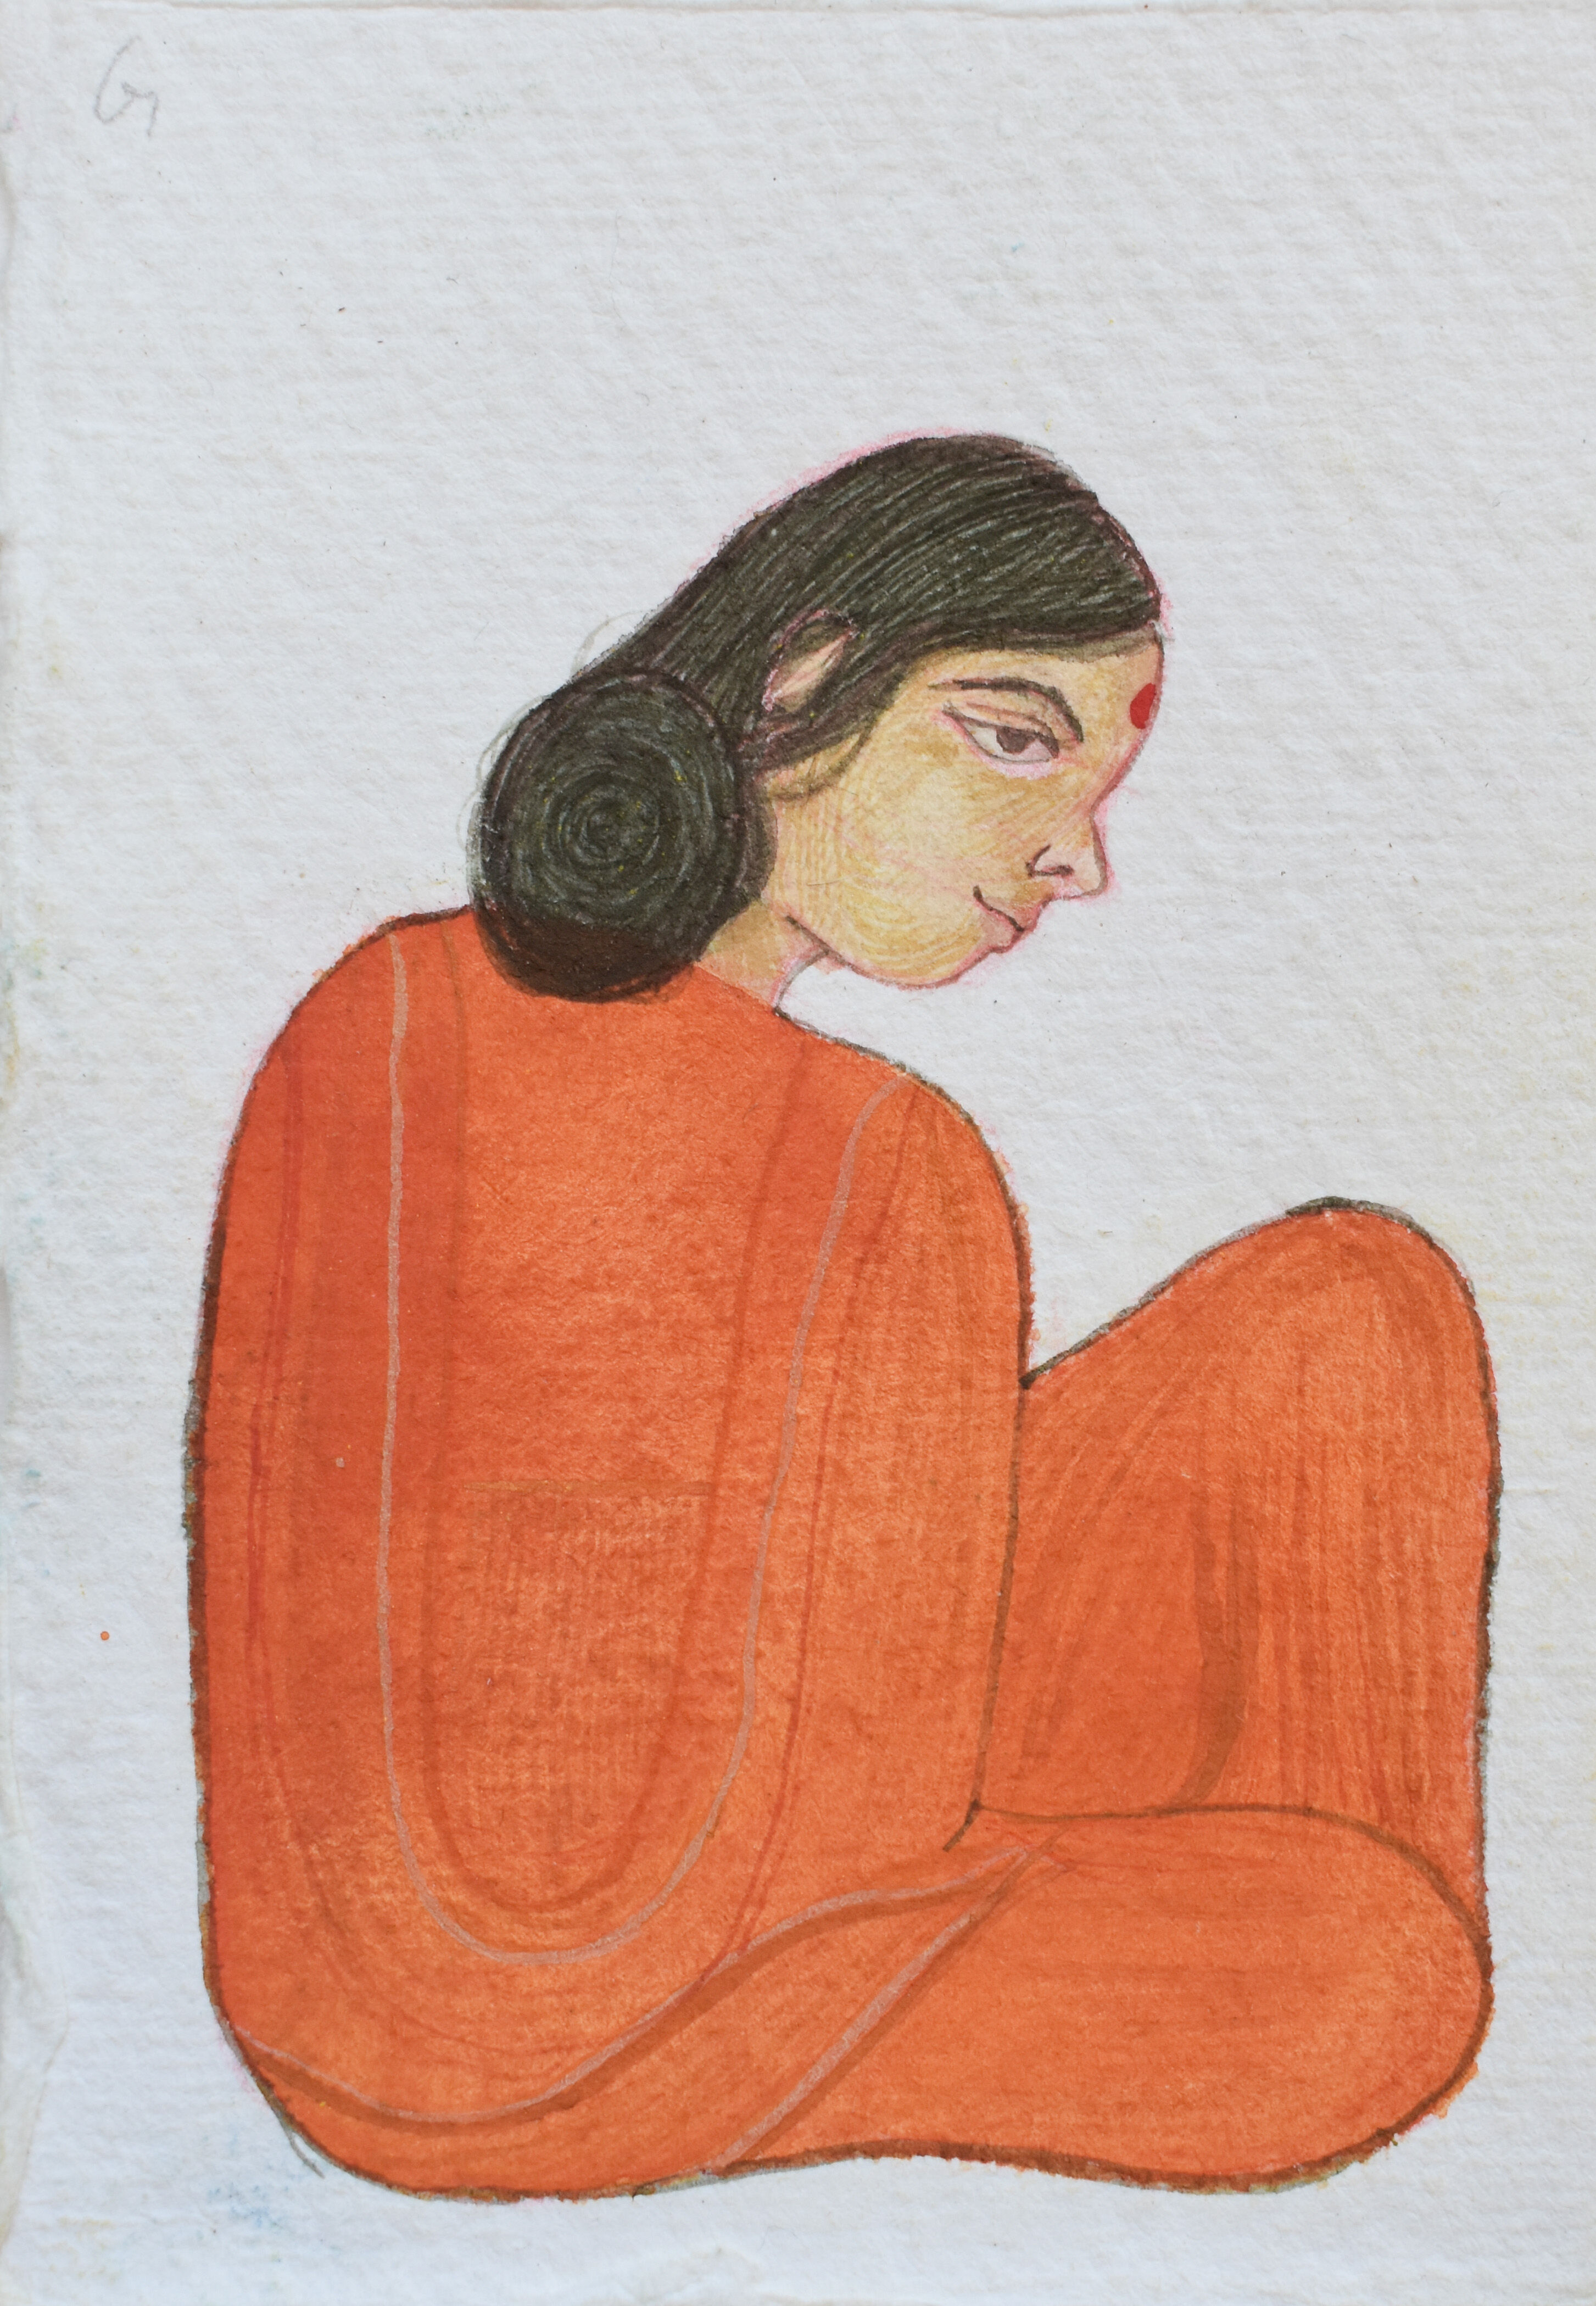 A side profile of a serene woman clad in an orange robe, with a traditional red bindi on her forehead, evoking a sense of calm contemplation.